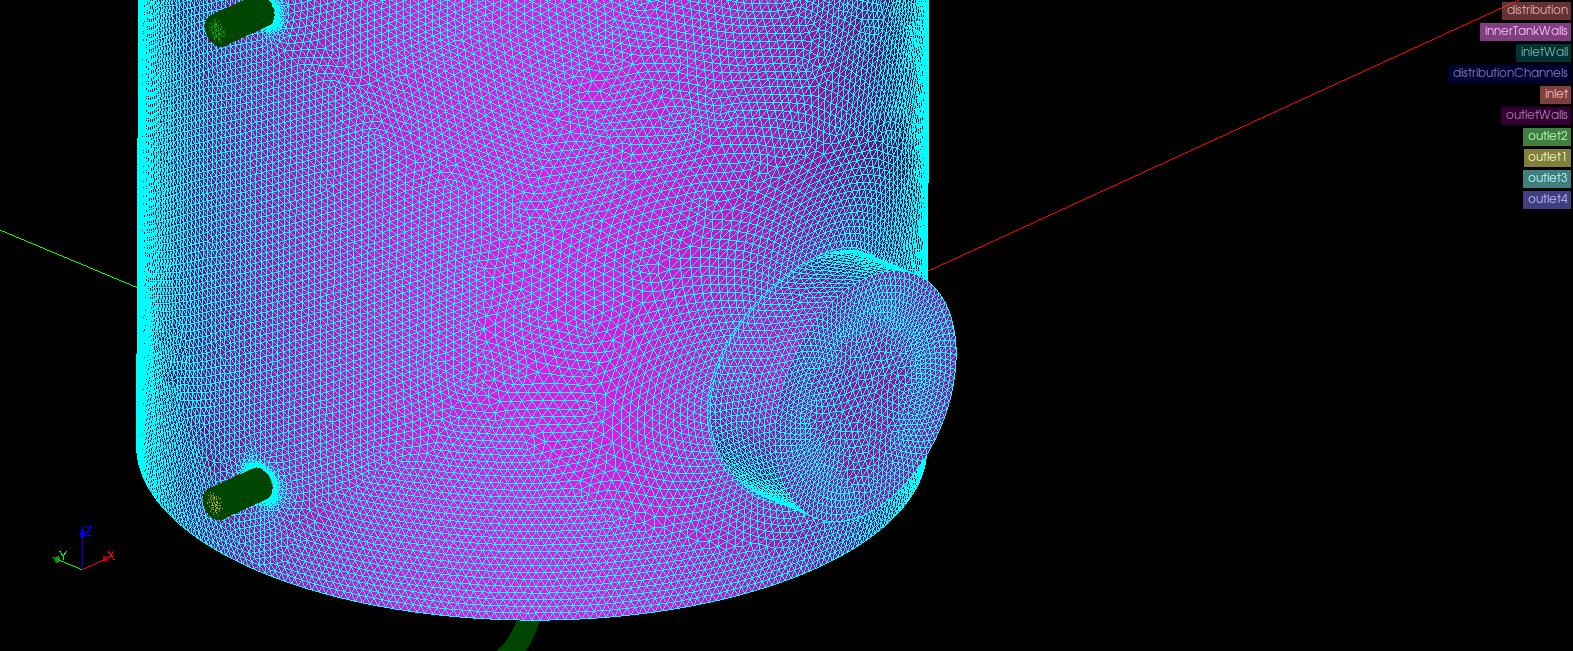 Image: Surface triangulation of the bottom part of the tank